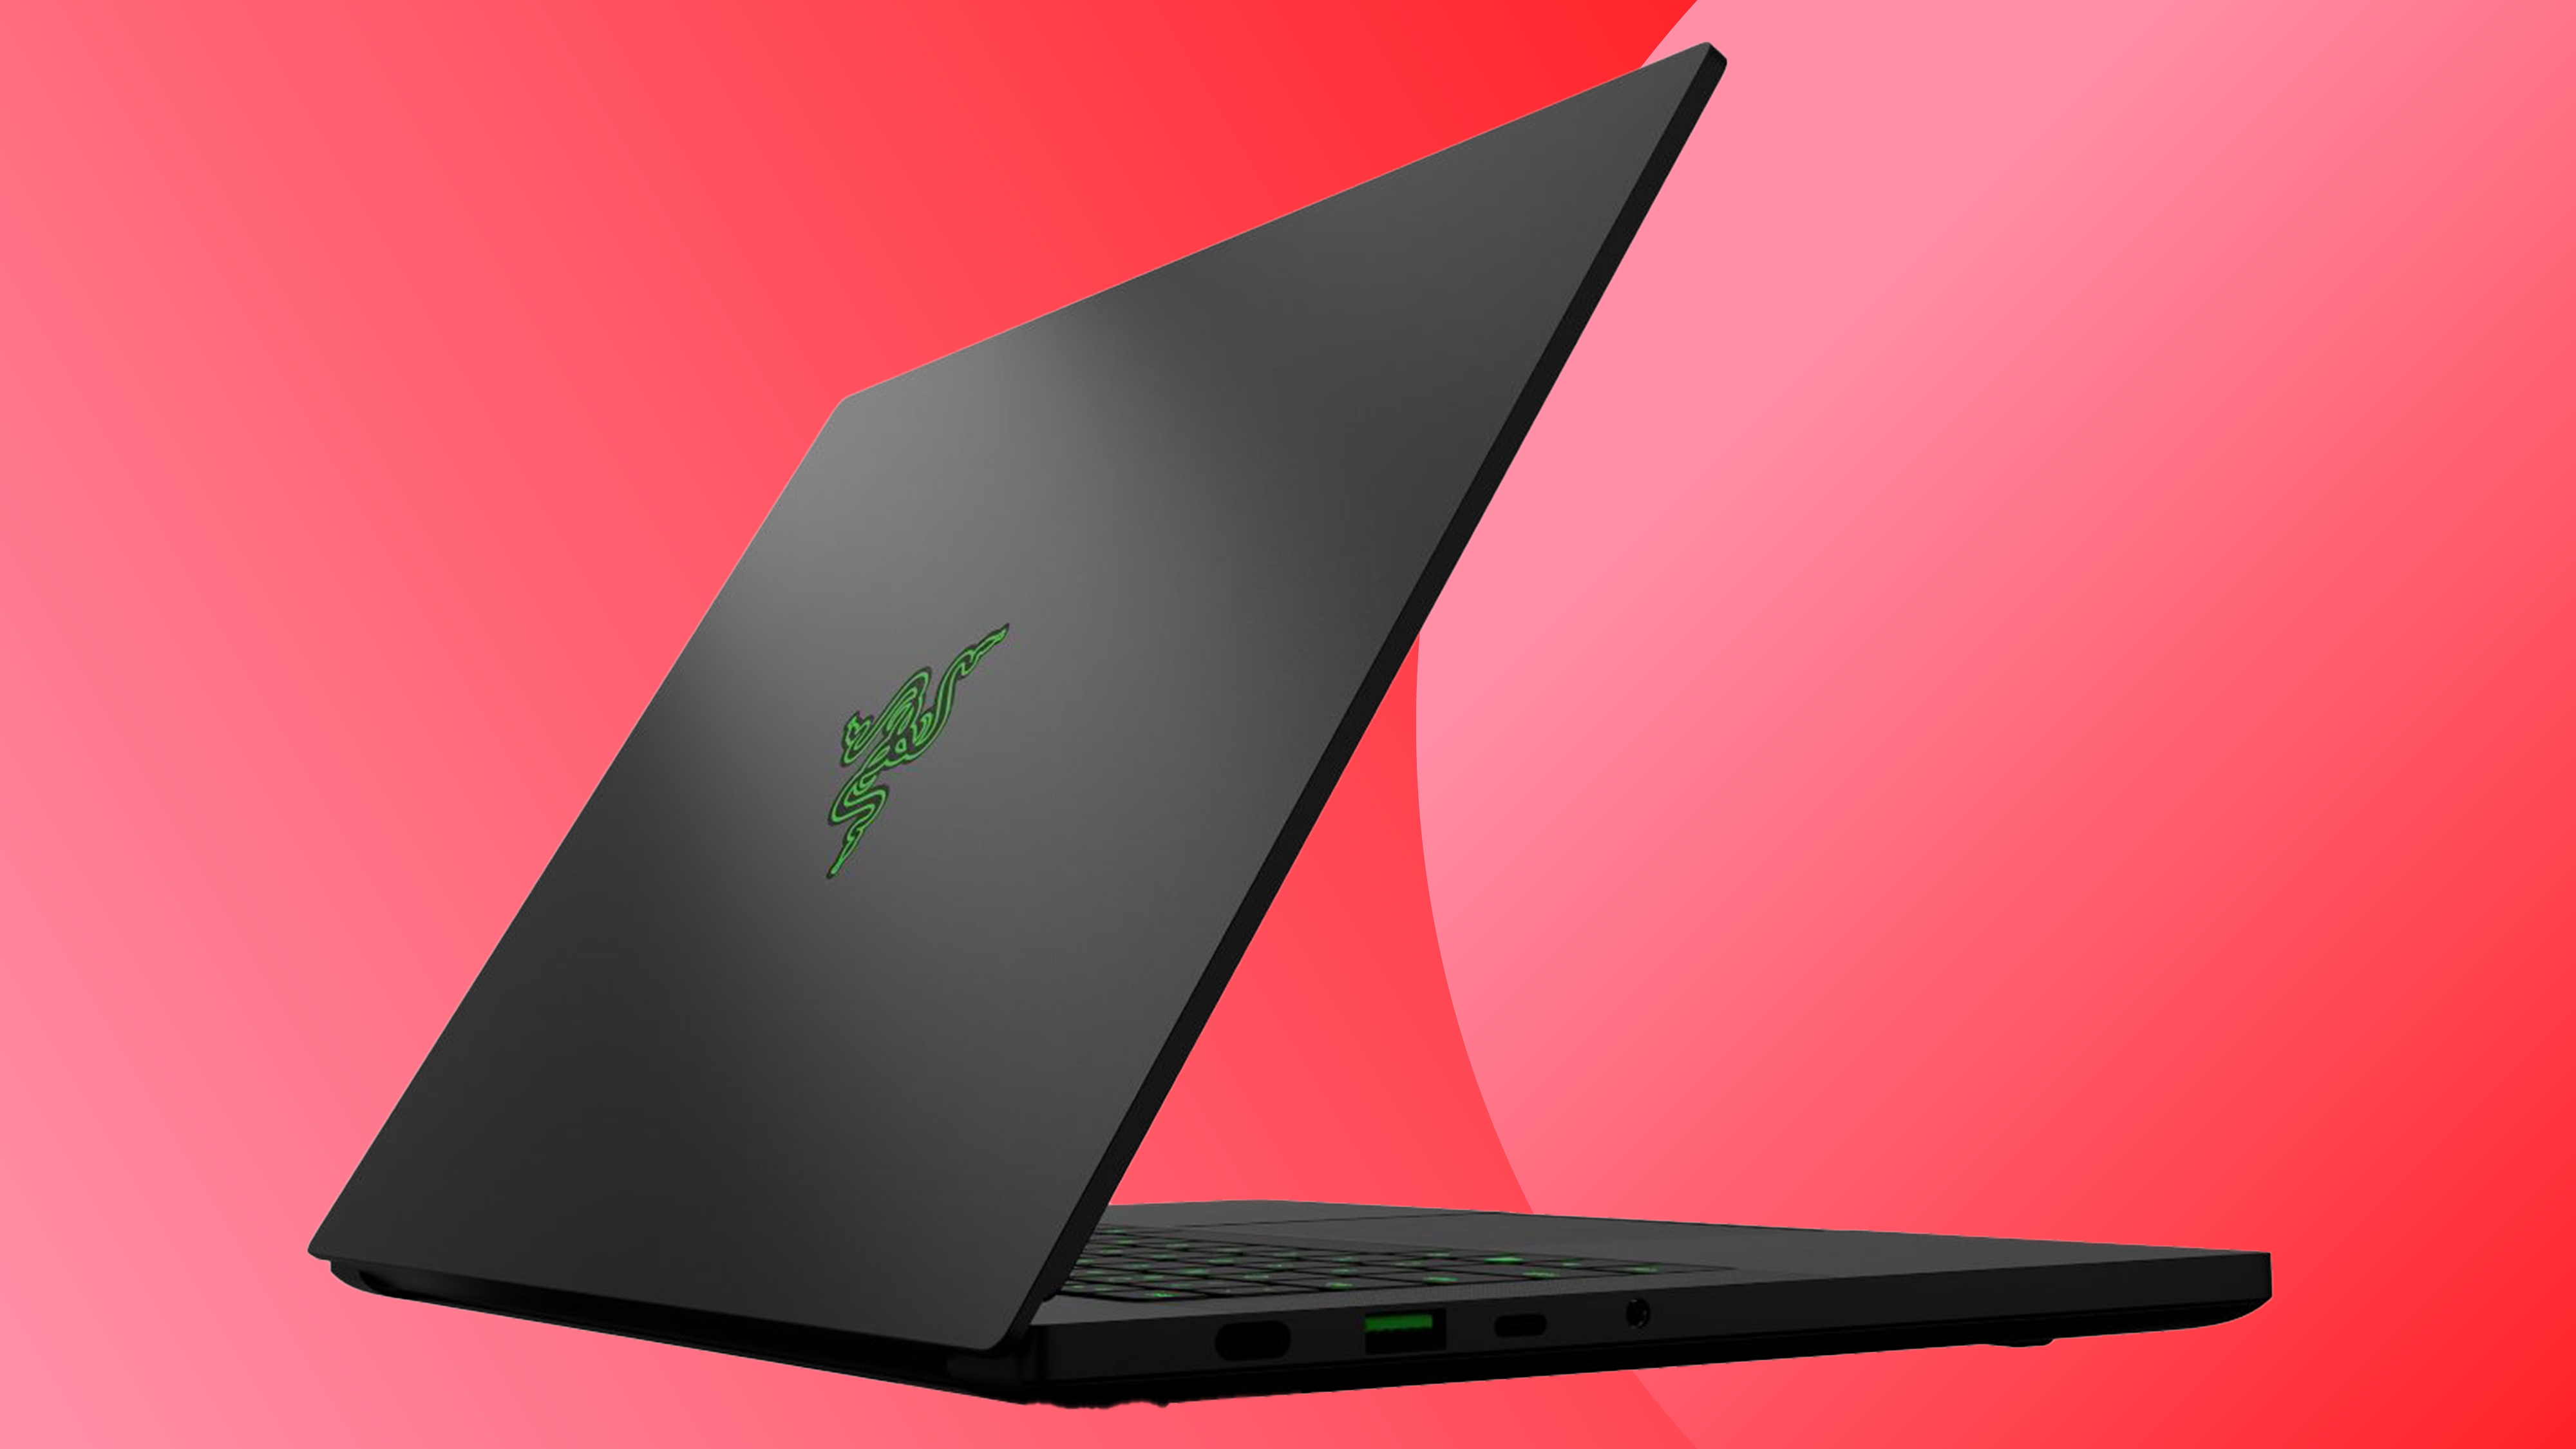 A Razer Black Friday deals image with a Razer Blade 14 on a red background